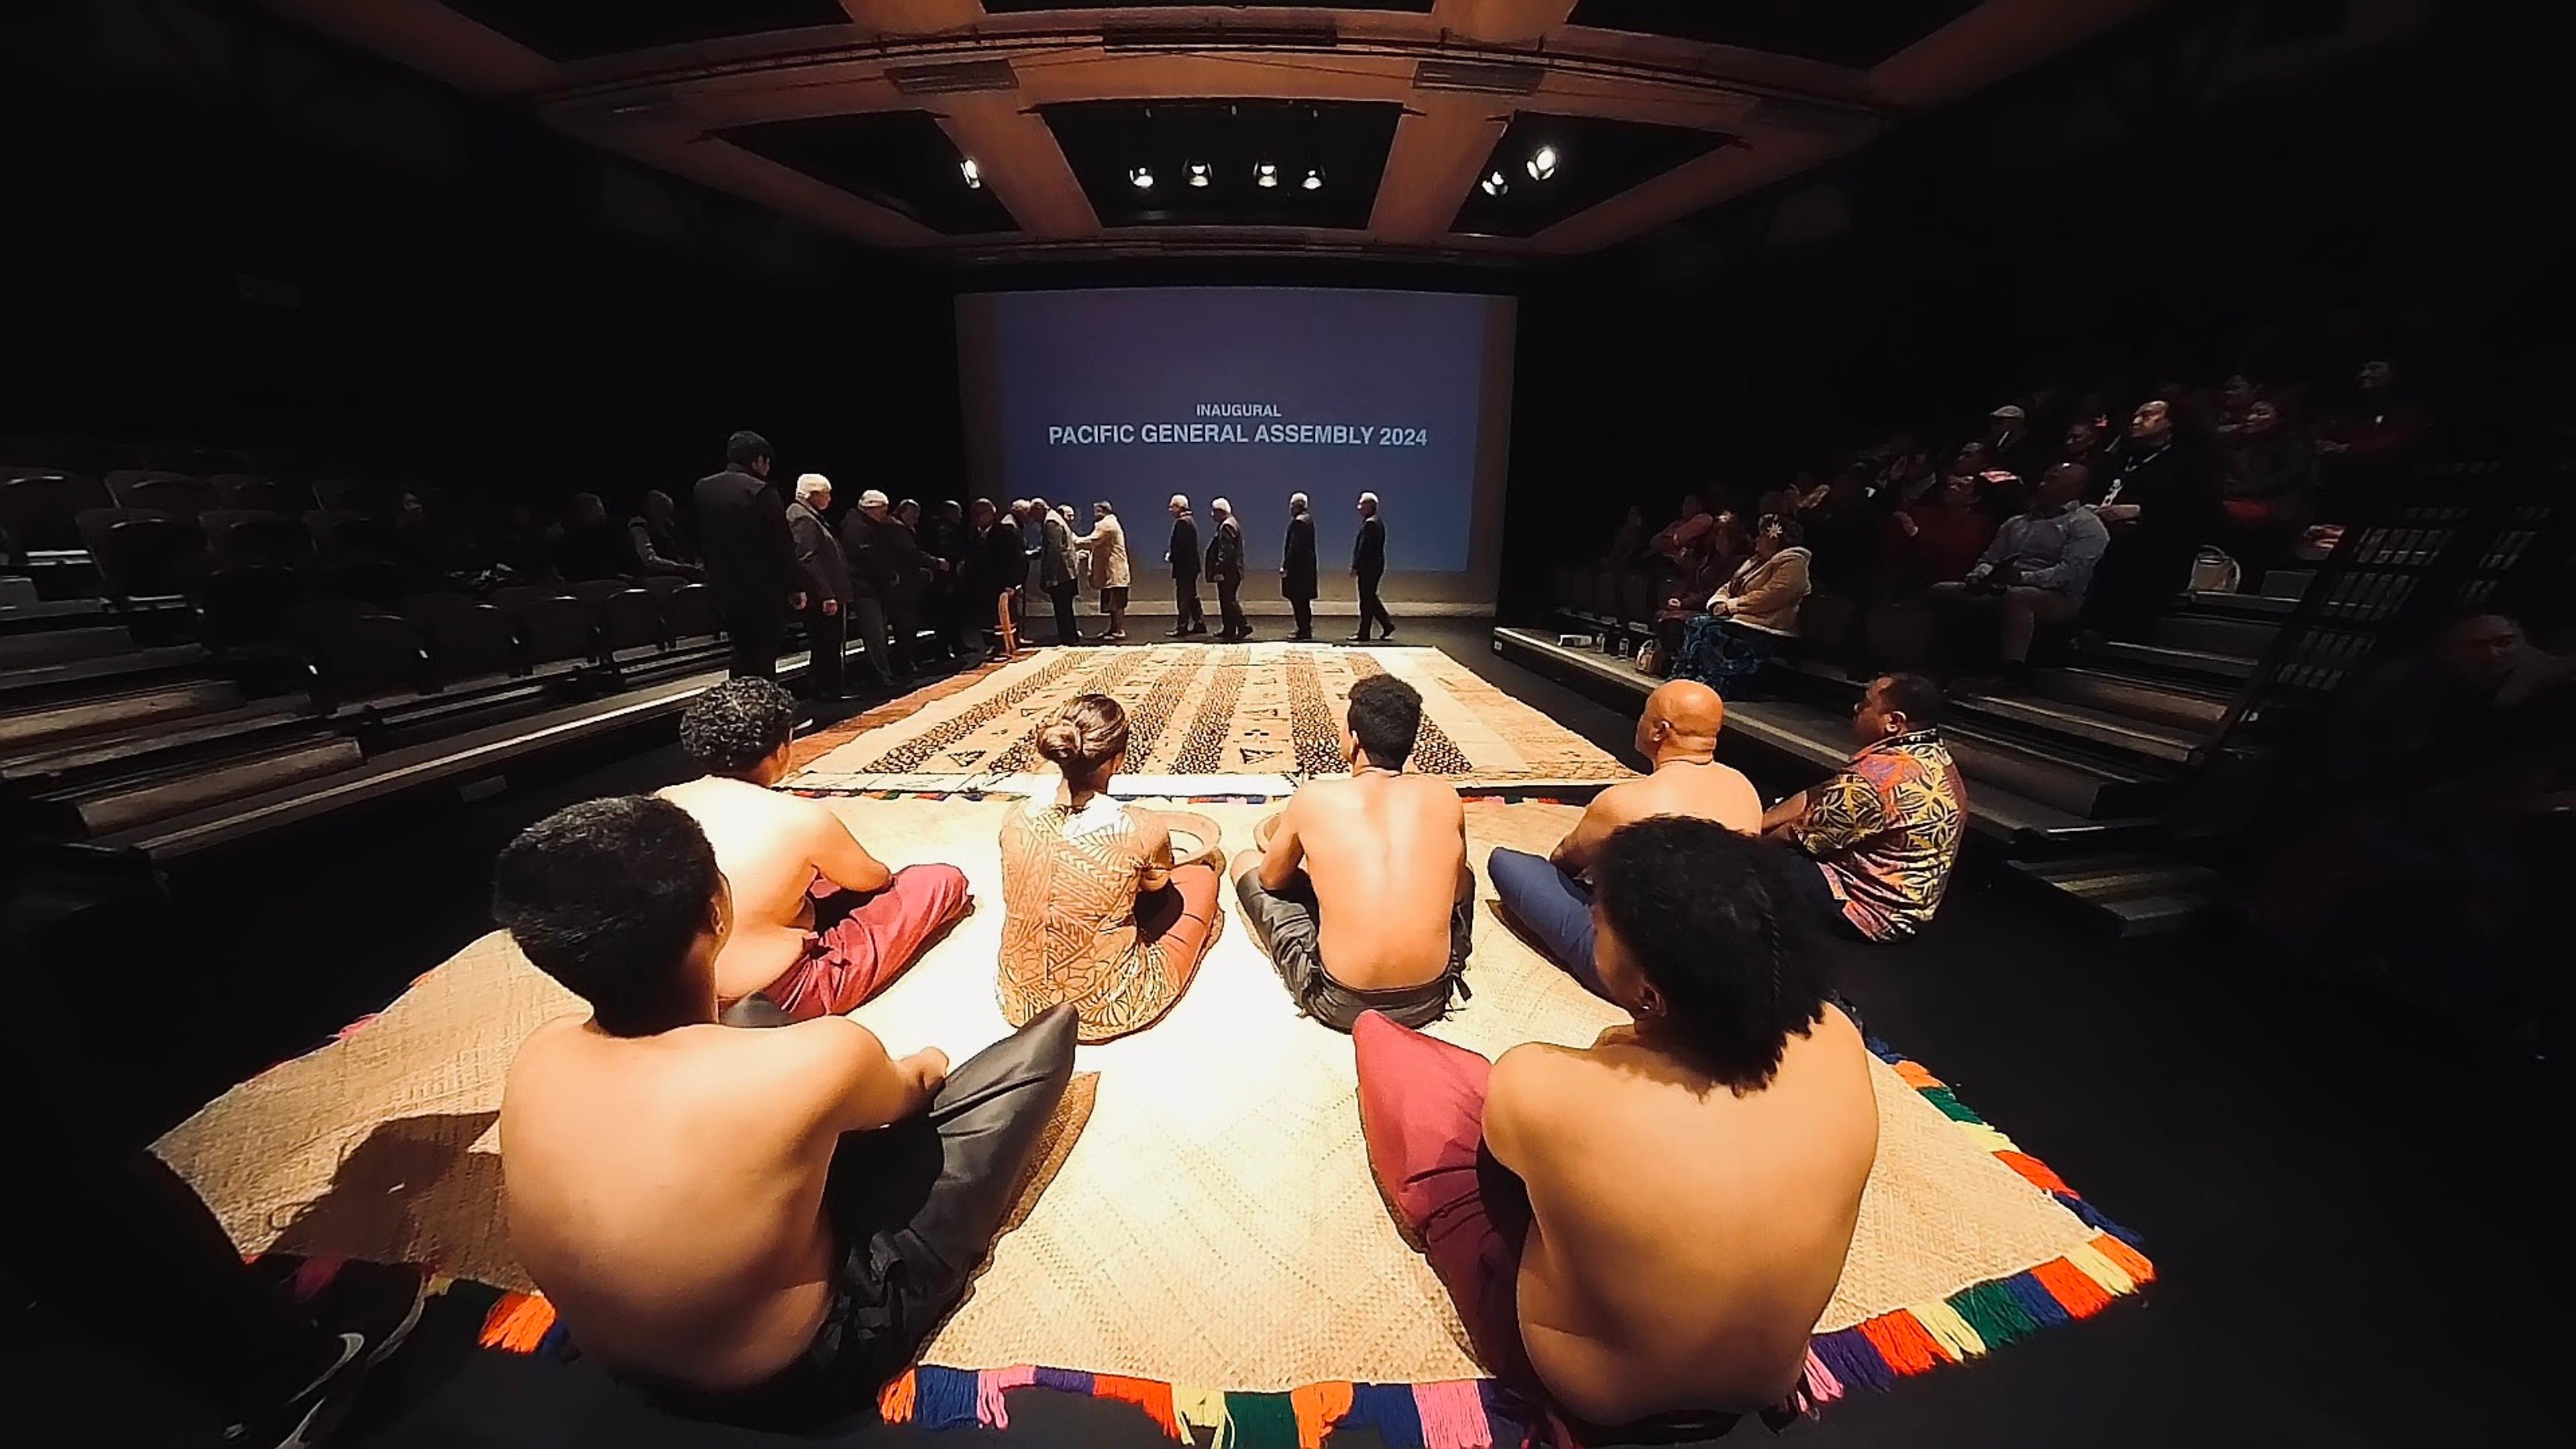 The first formal Talanoa Fono held between Tagata Moana elders and Māori representatives from Ngāti Whātua Ōrakei and Te Kiingitanga launched the Pacific General Assembly 2024 at Māngere Arts Centre.